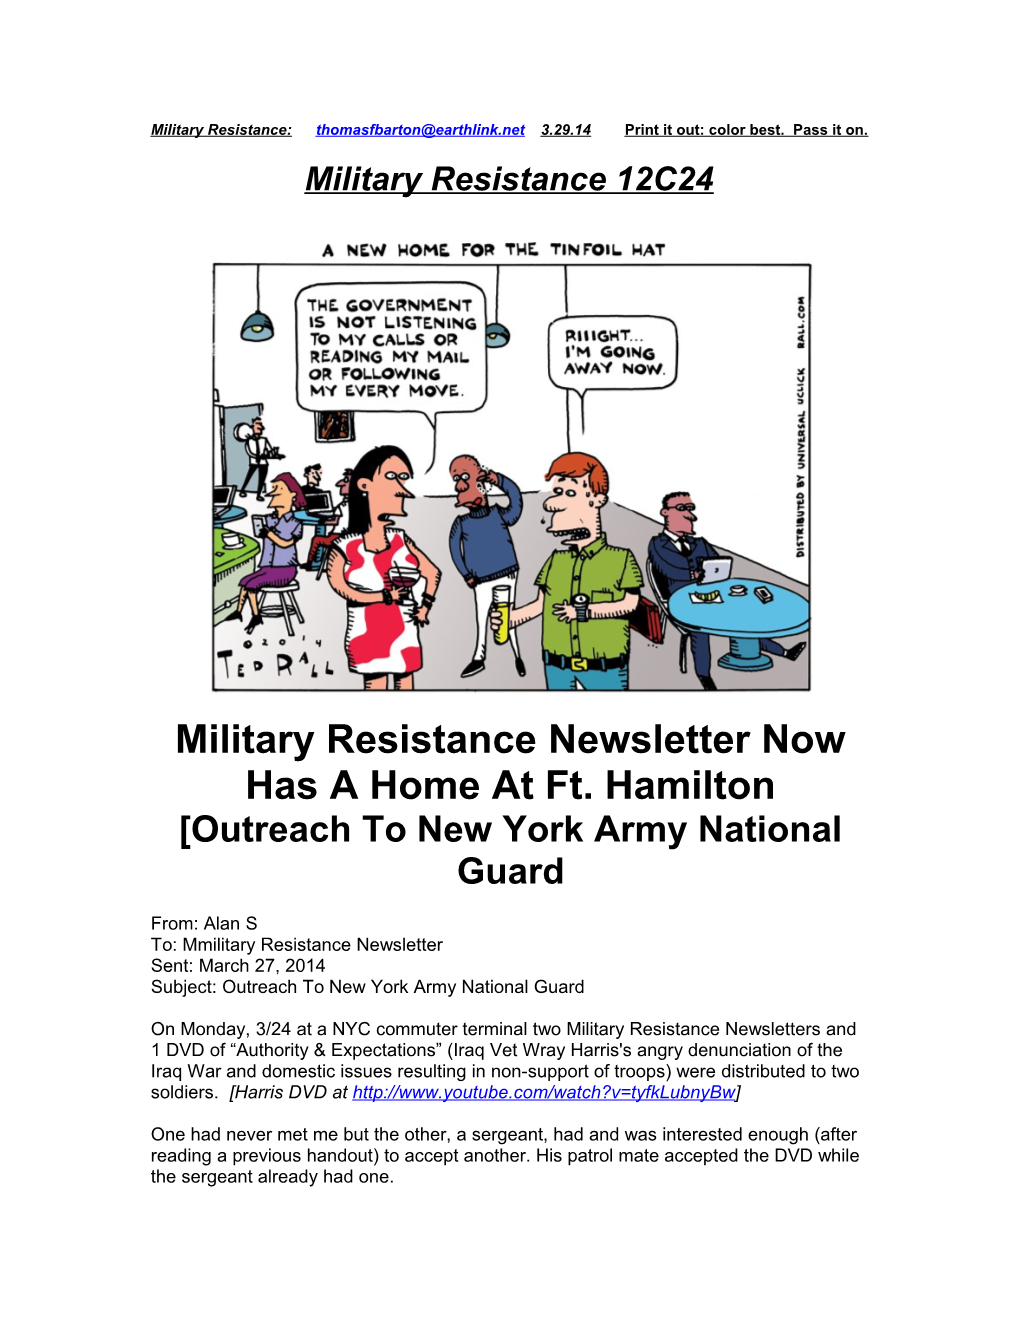 Military Resistance Newsletter Now Has a Home at Ft. Hamilton